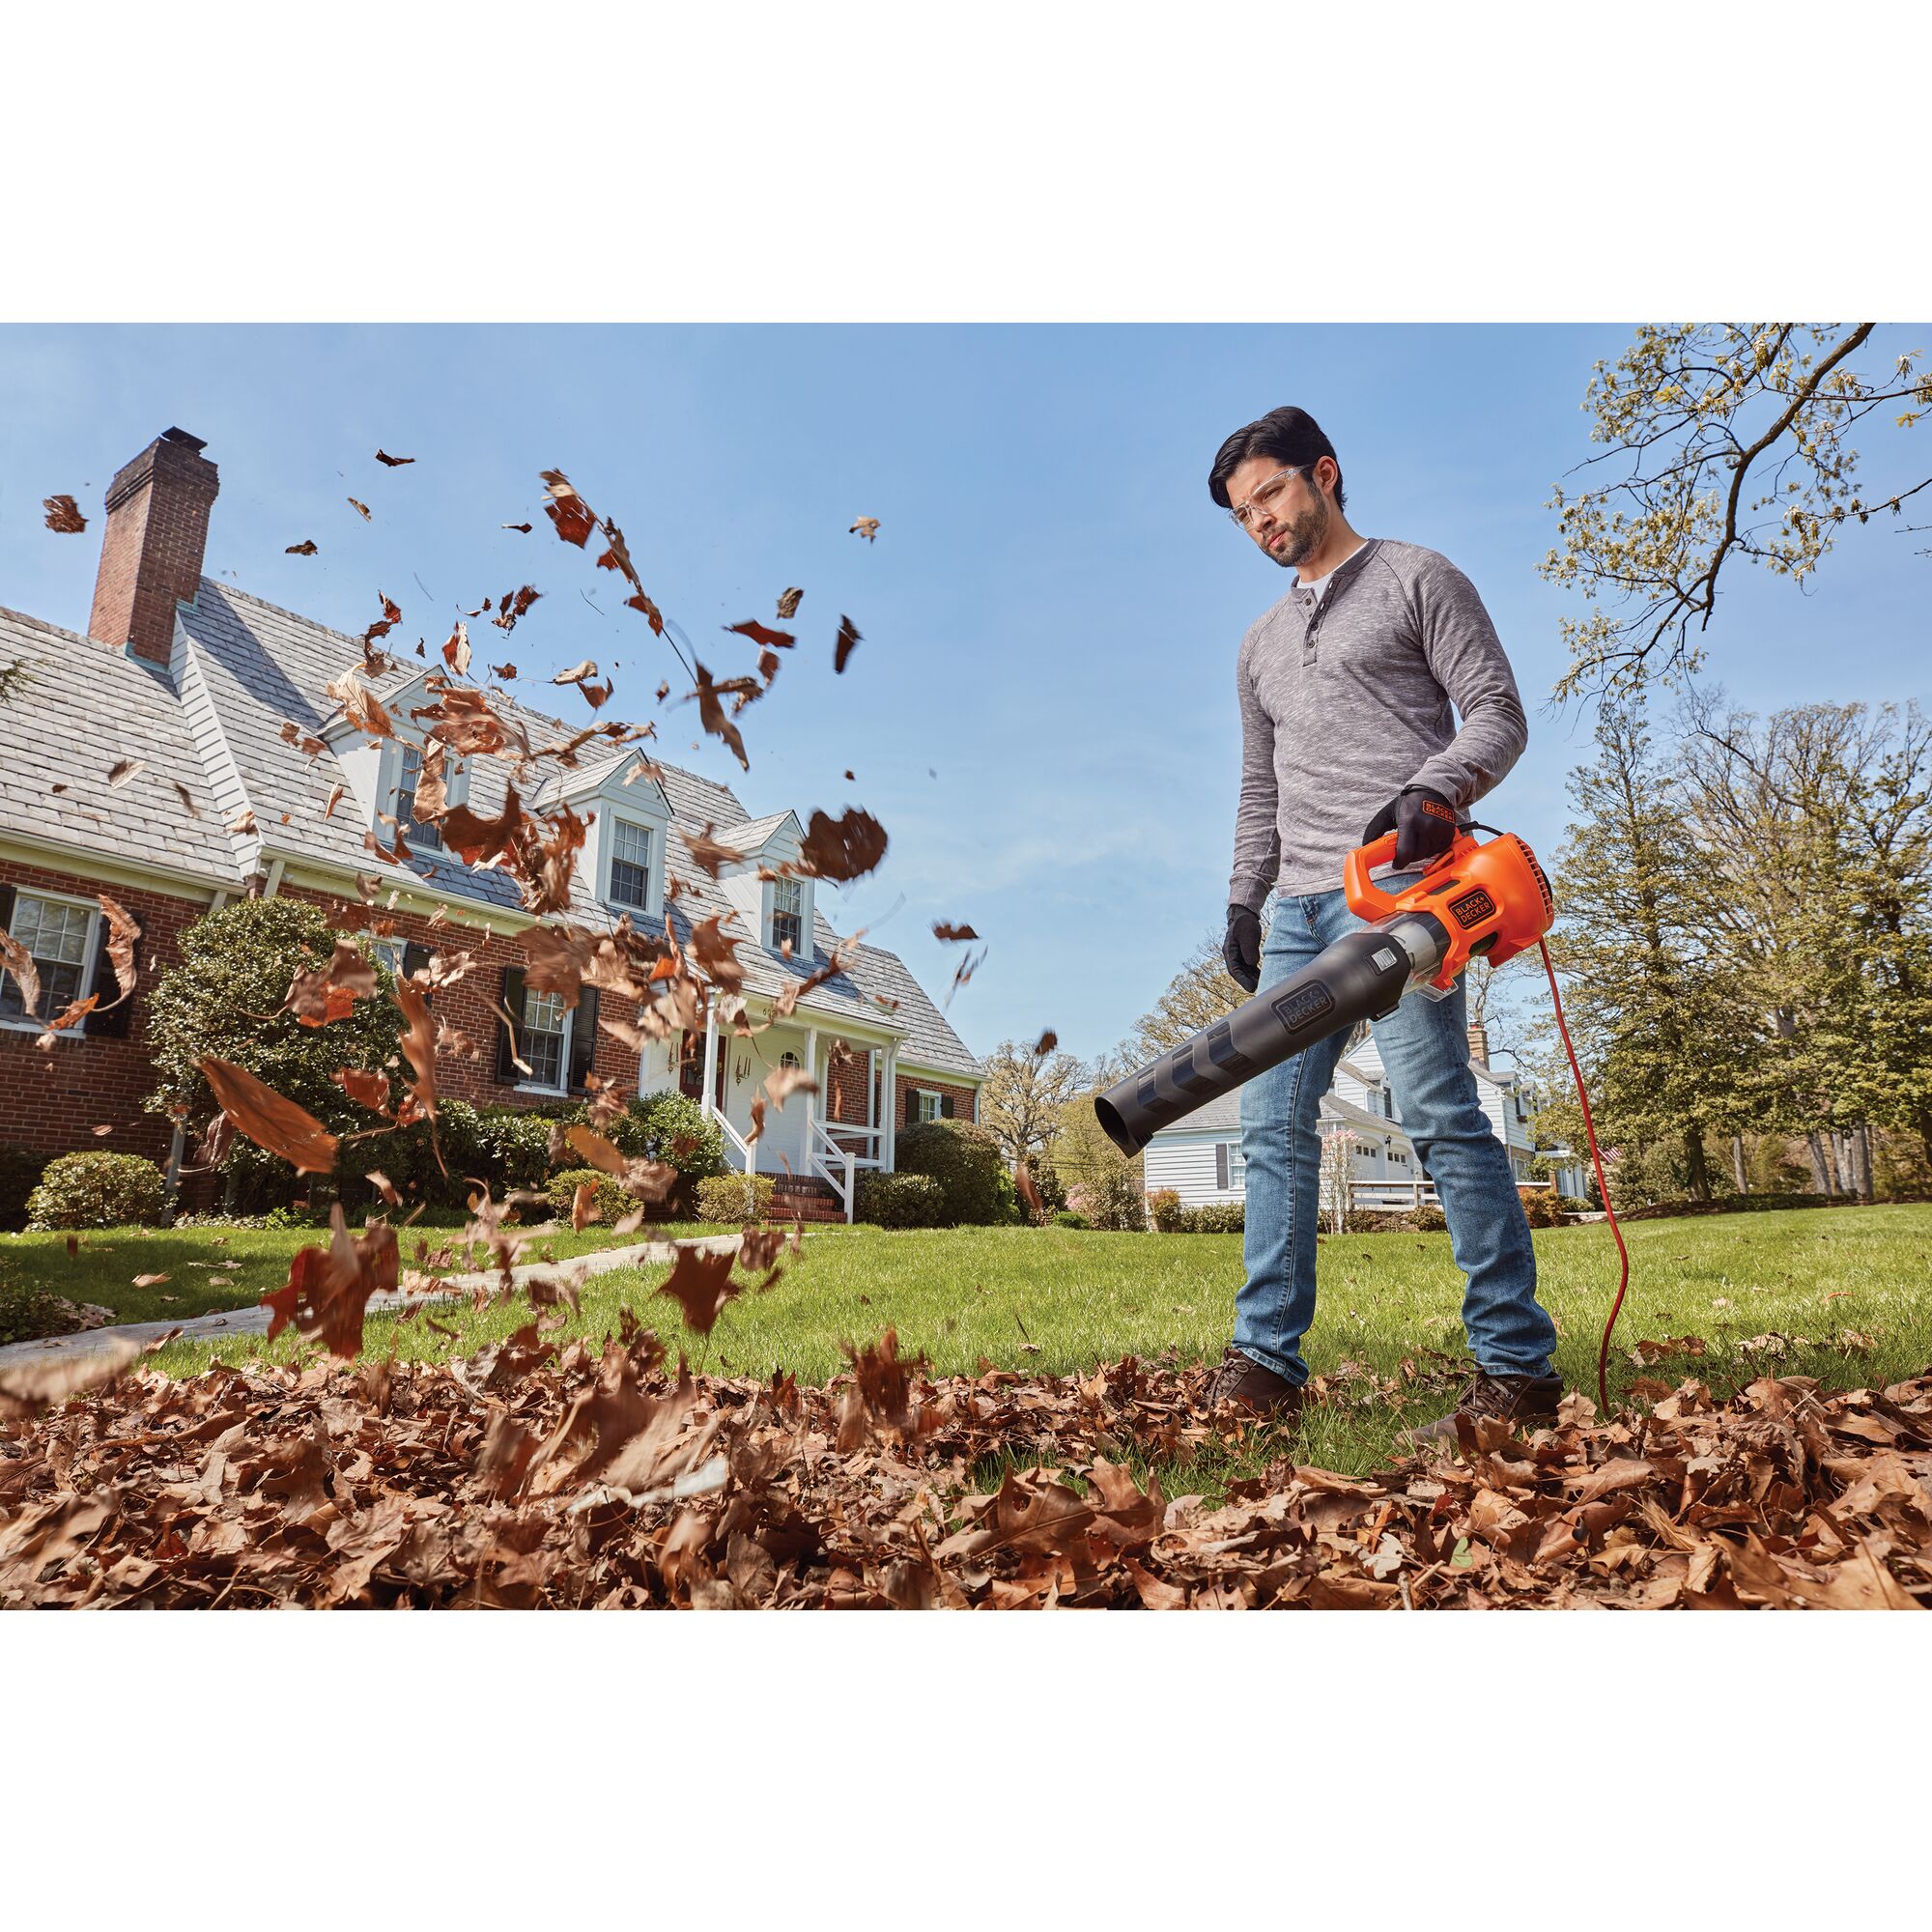 9 ampere electric axial leaf blower being used by a person.